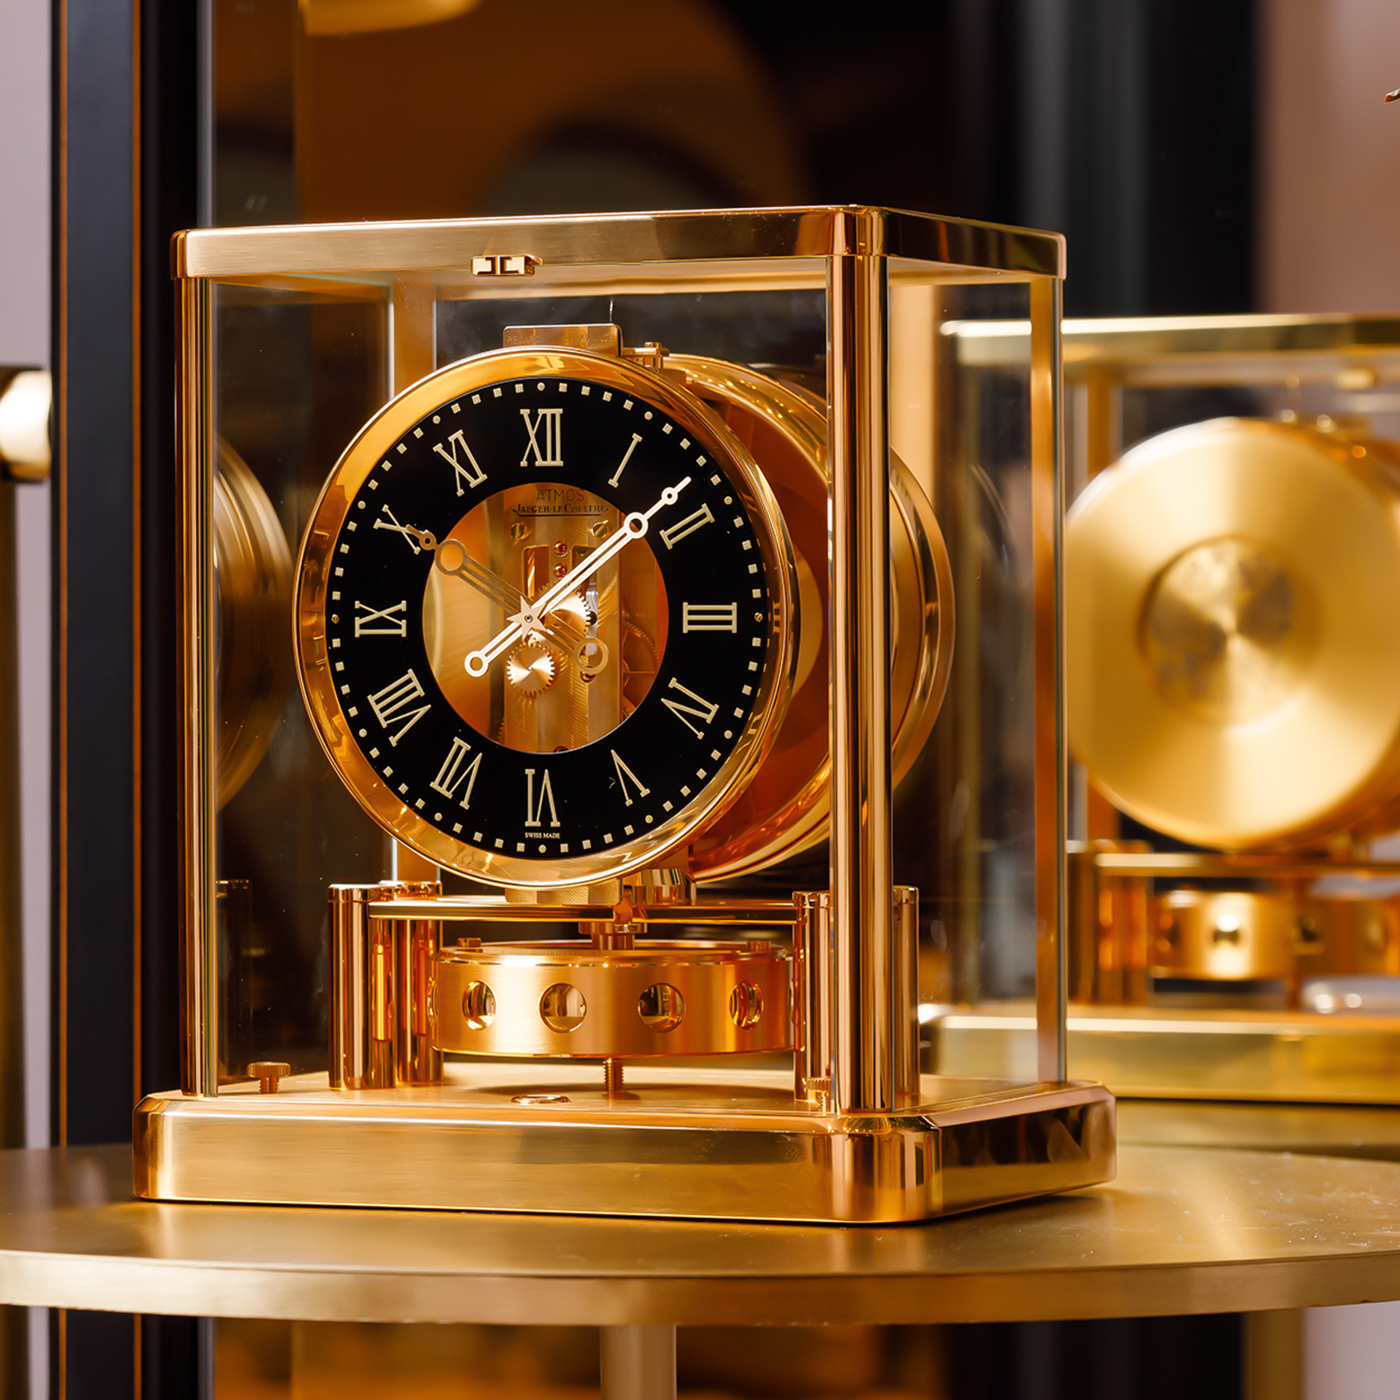 Jaeger LeCoultre Atmos clock – The Watch Collector